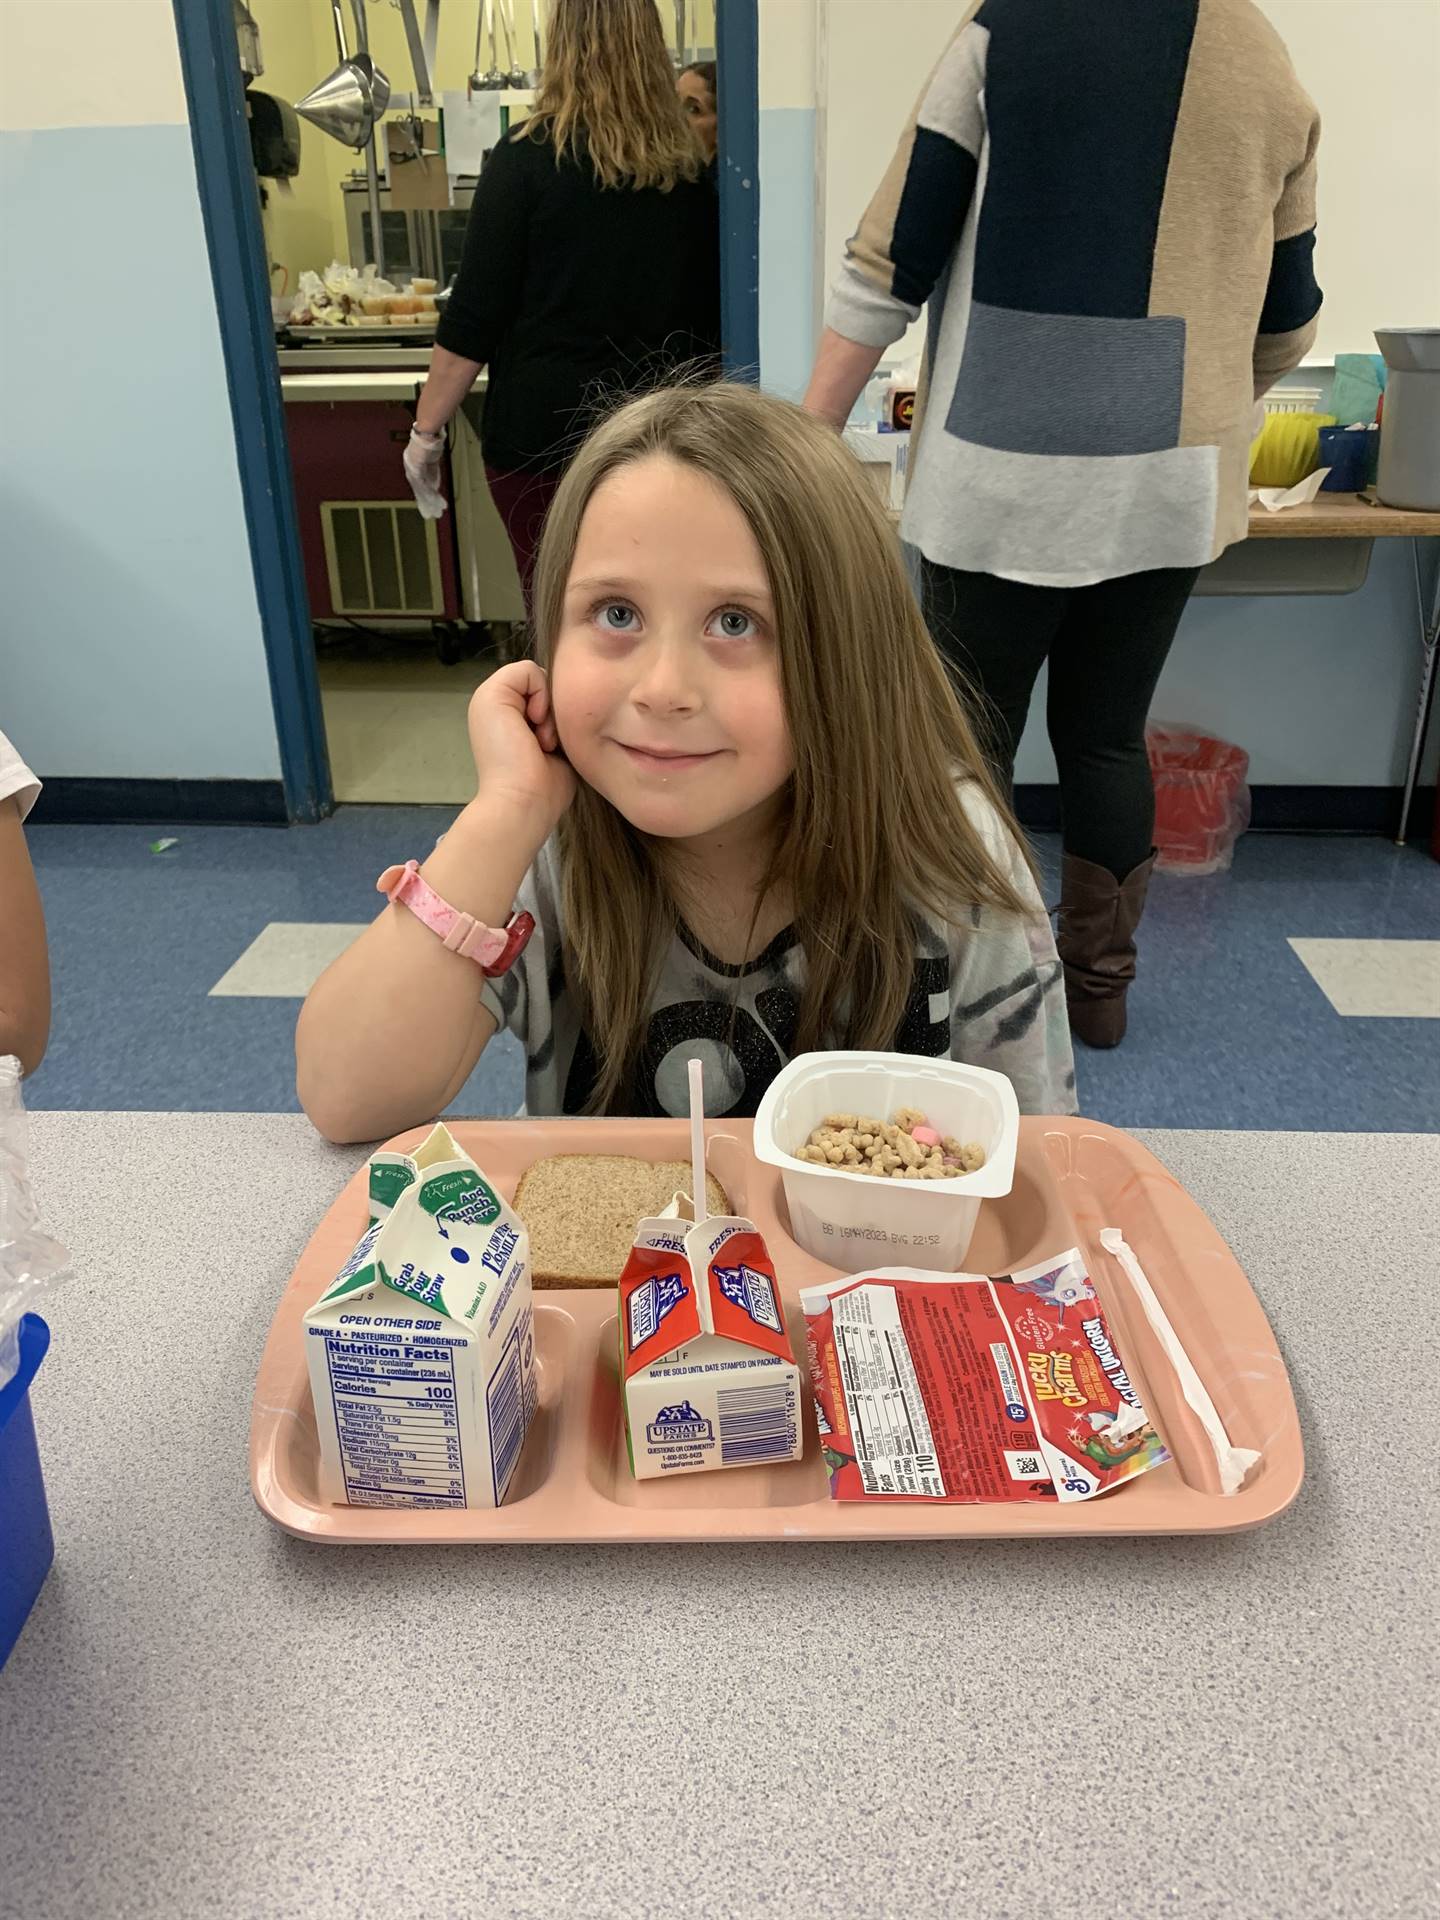 child with tray of food on table smiling